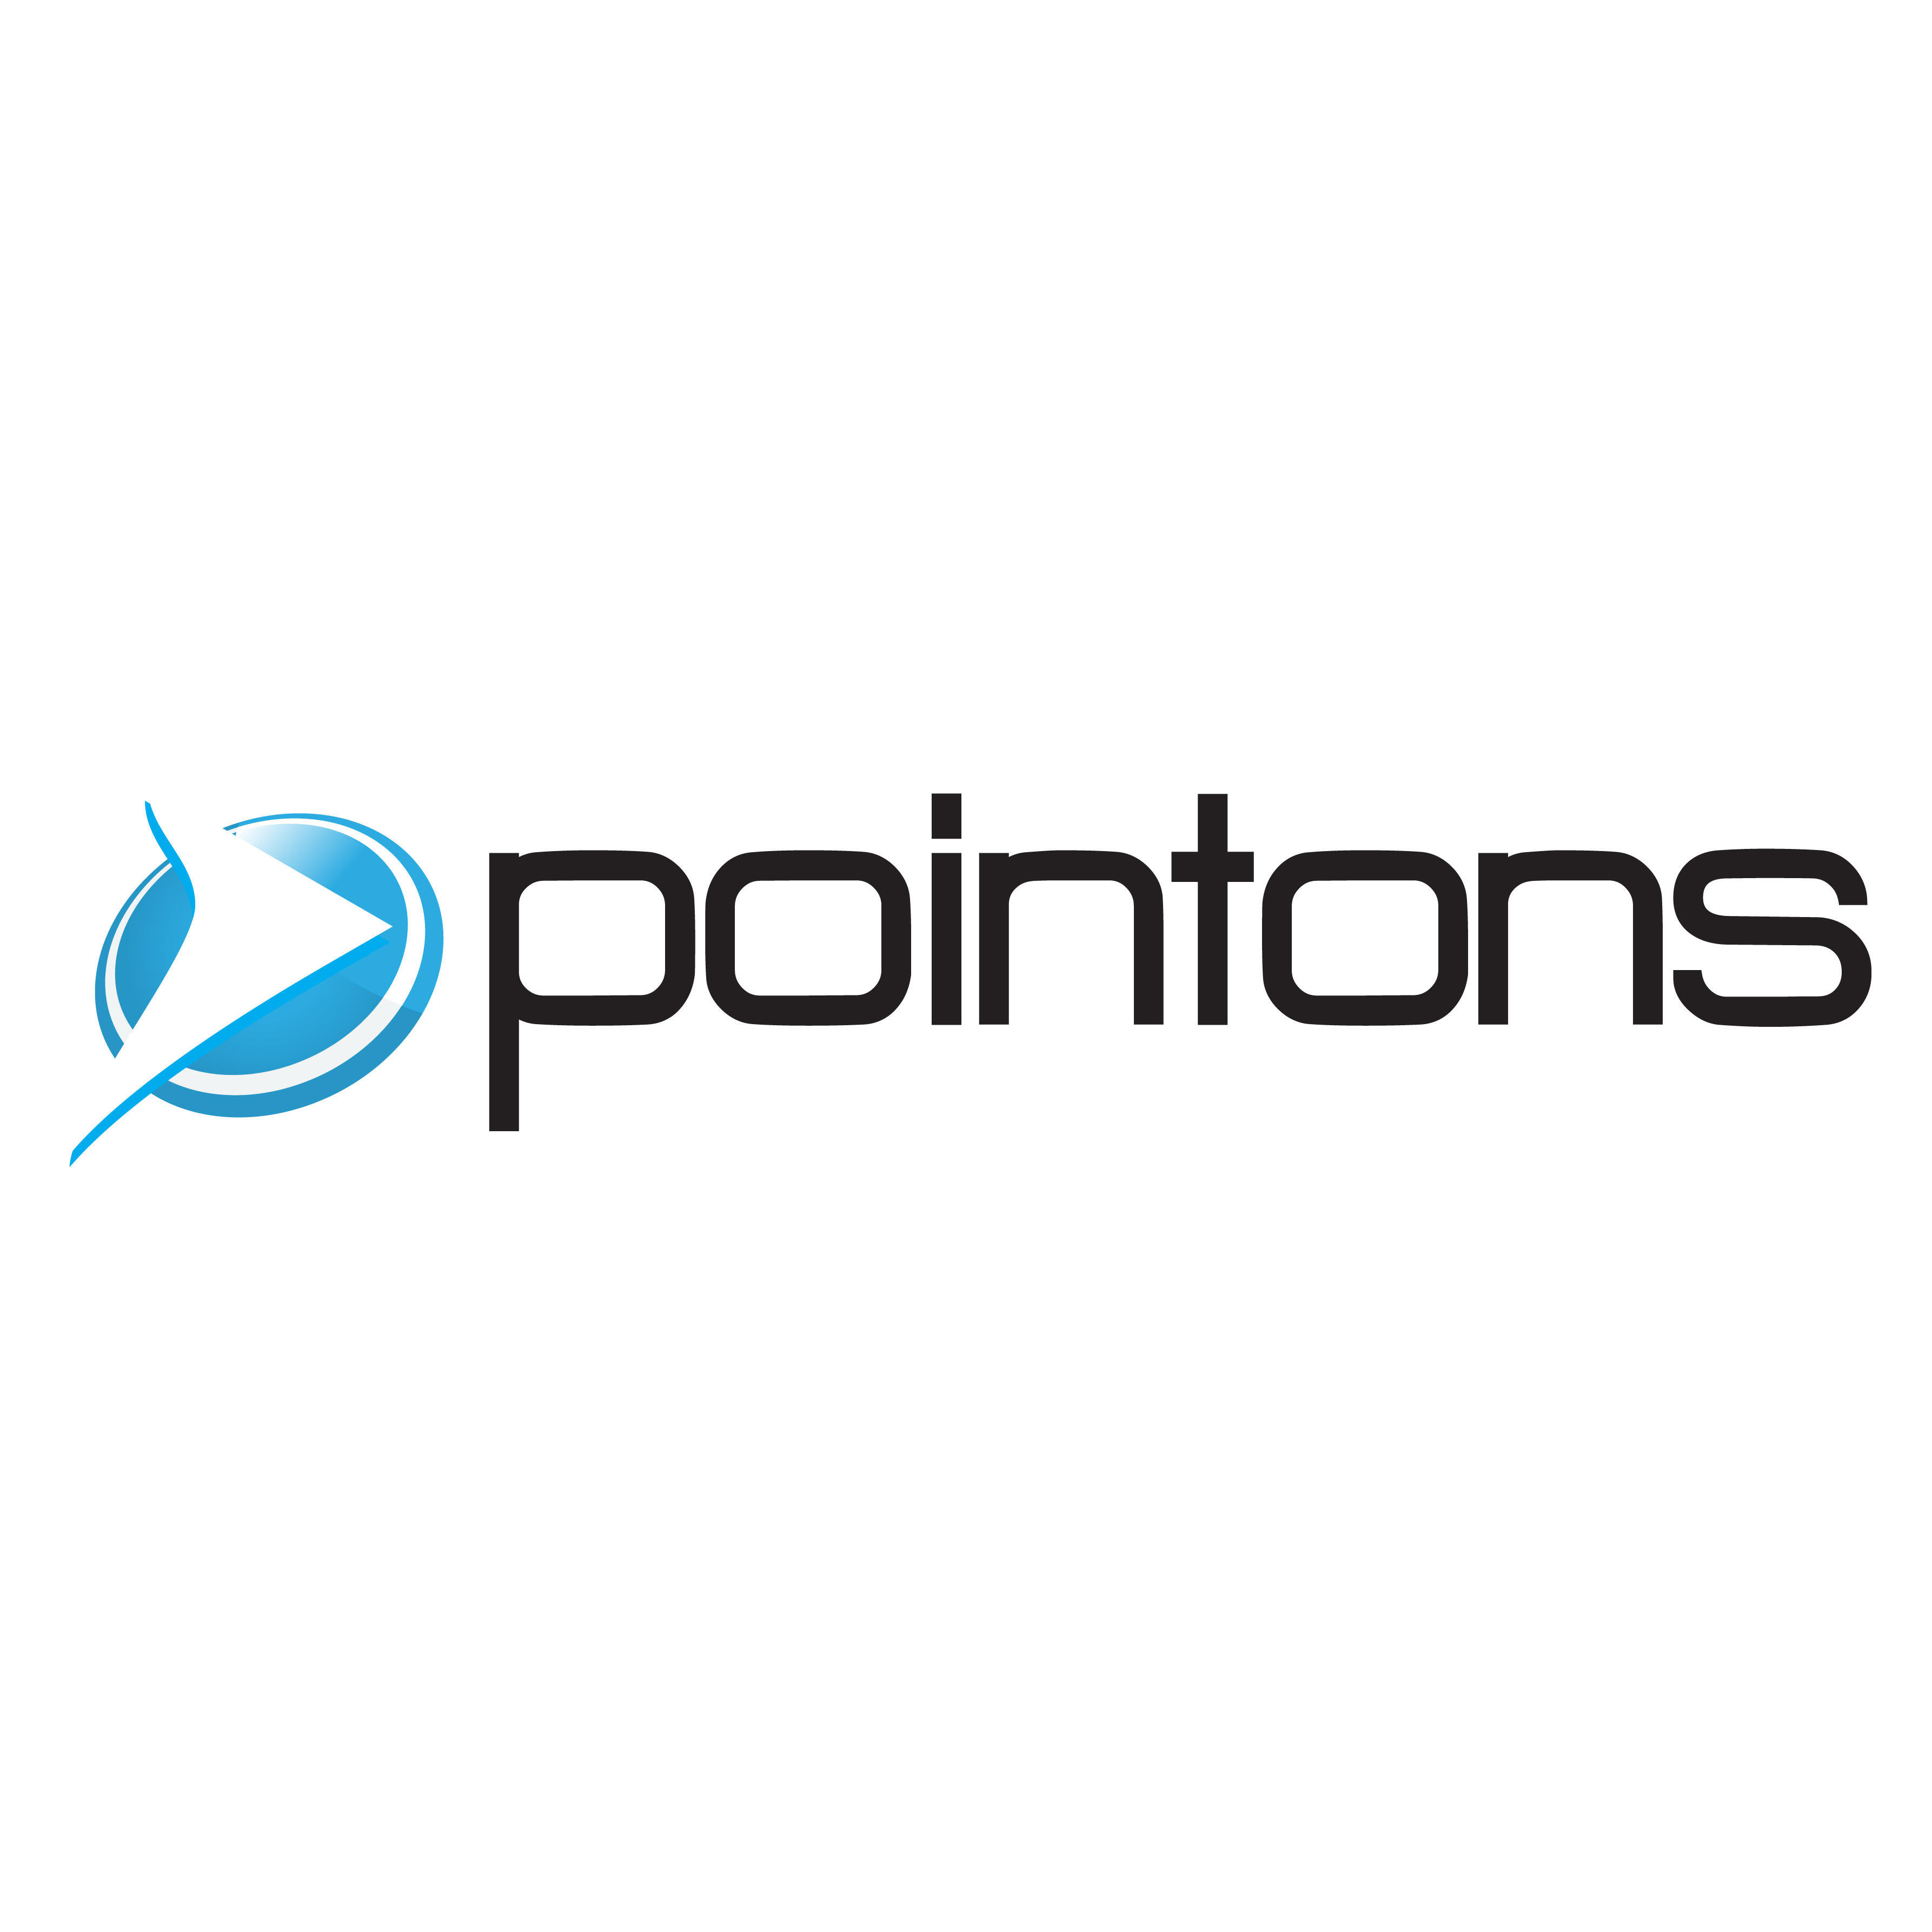 Pointons Pty Ltd Chartered Accountants and Financial Planners Gawler (08) 8523 0133